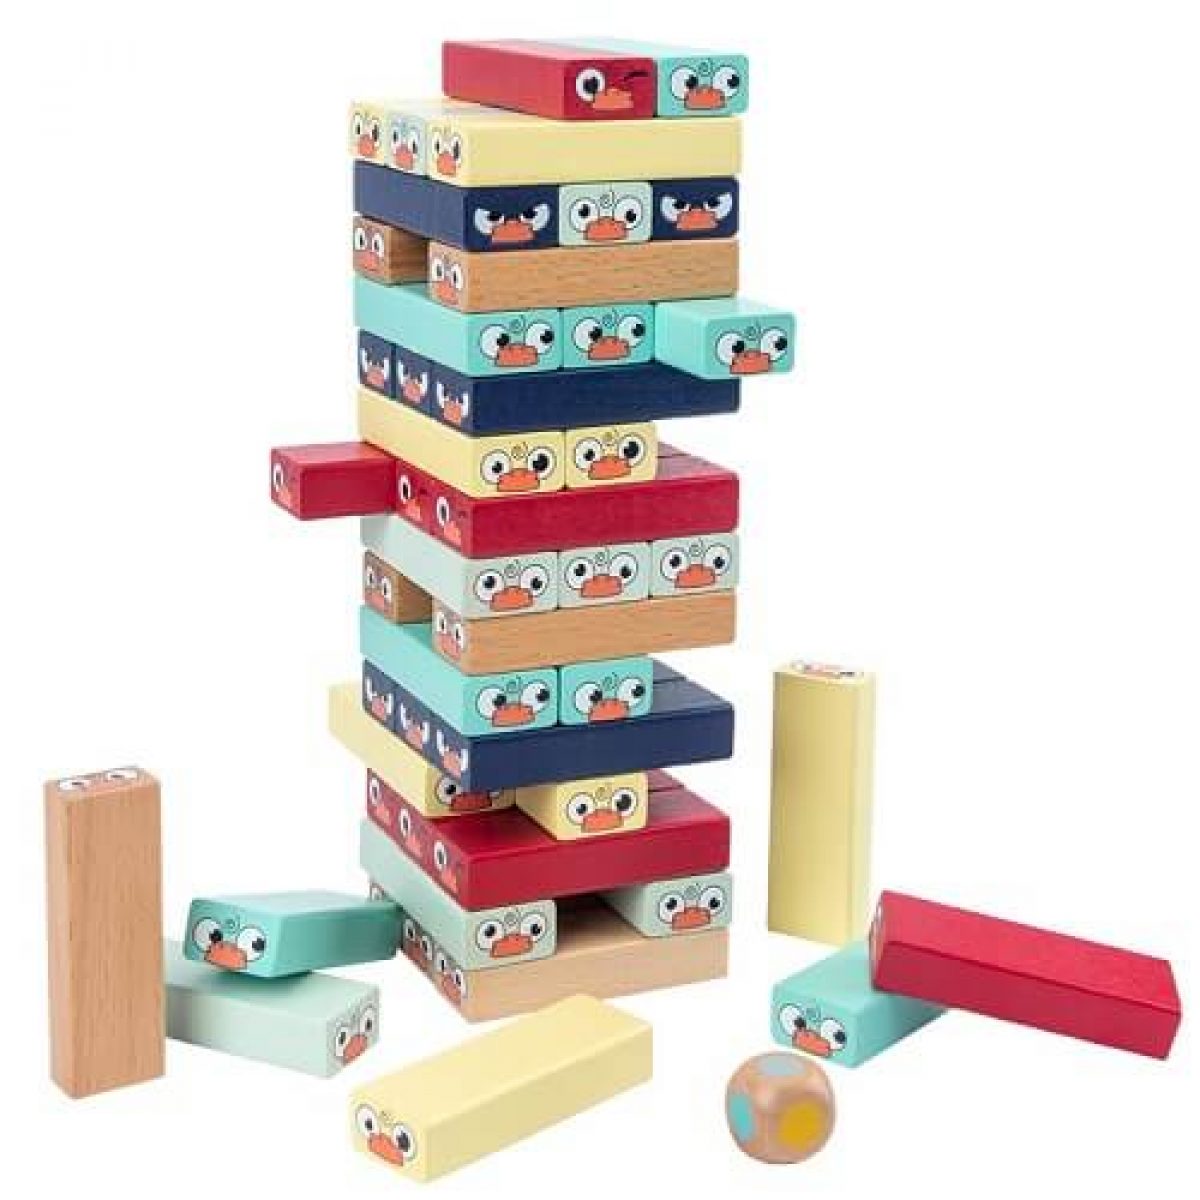 Adult Limited Jenga Stone Block Combination - Shop Verde Items for Display  - Pinkoi